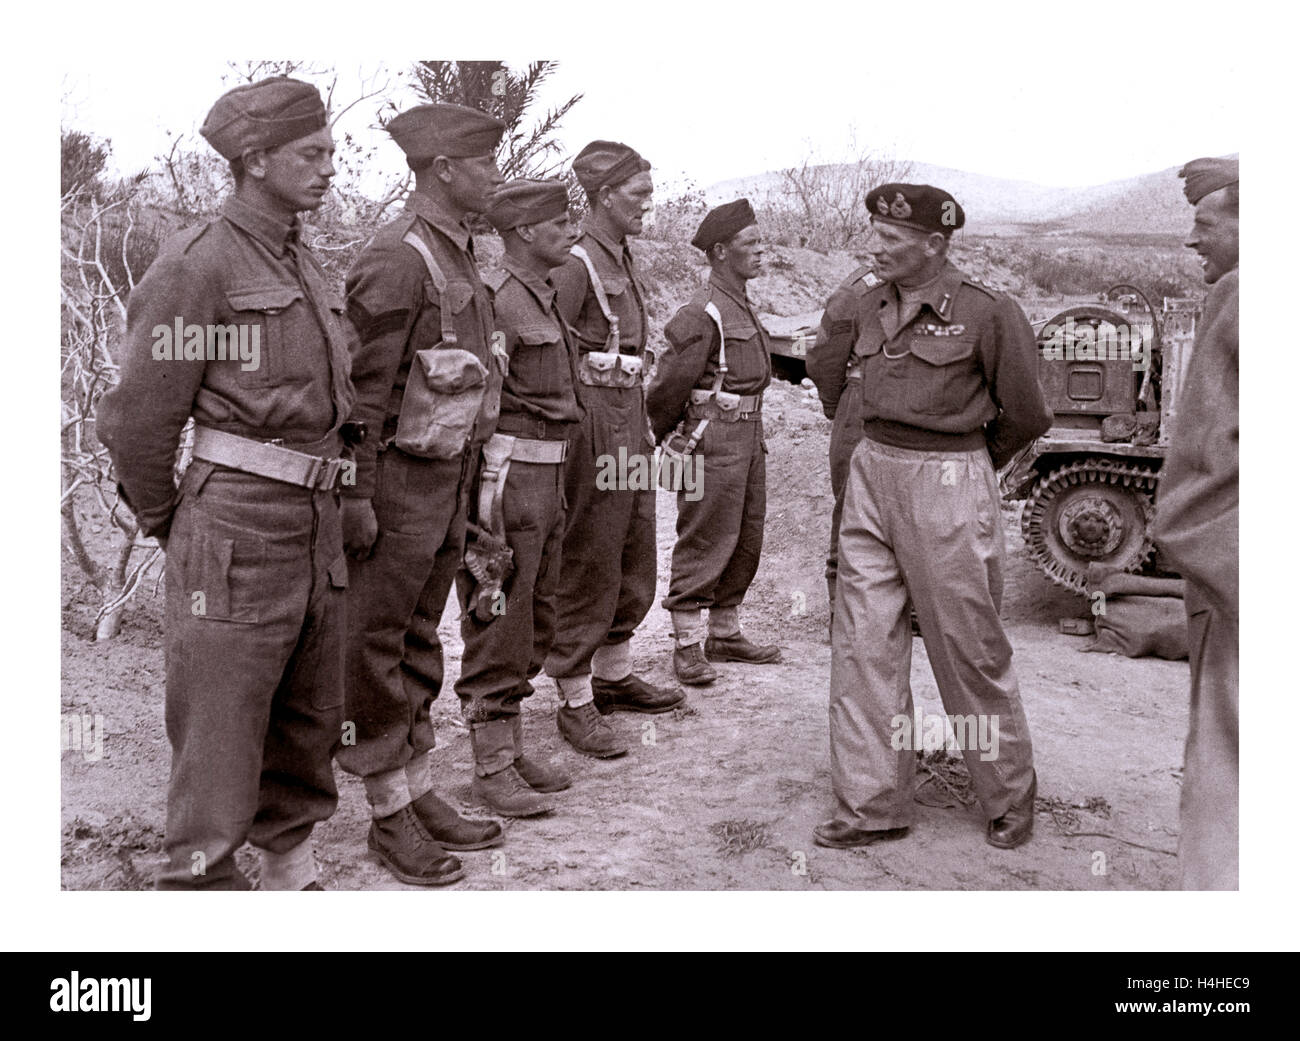 'MONTY' Field Marshall Bernard Montgomery, the hero of El Alamein and North Africa, reviewing an army platoon. He was one of the most inspirational military commanders of World War Two. Second World War WW2 Stock Photo